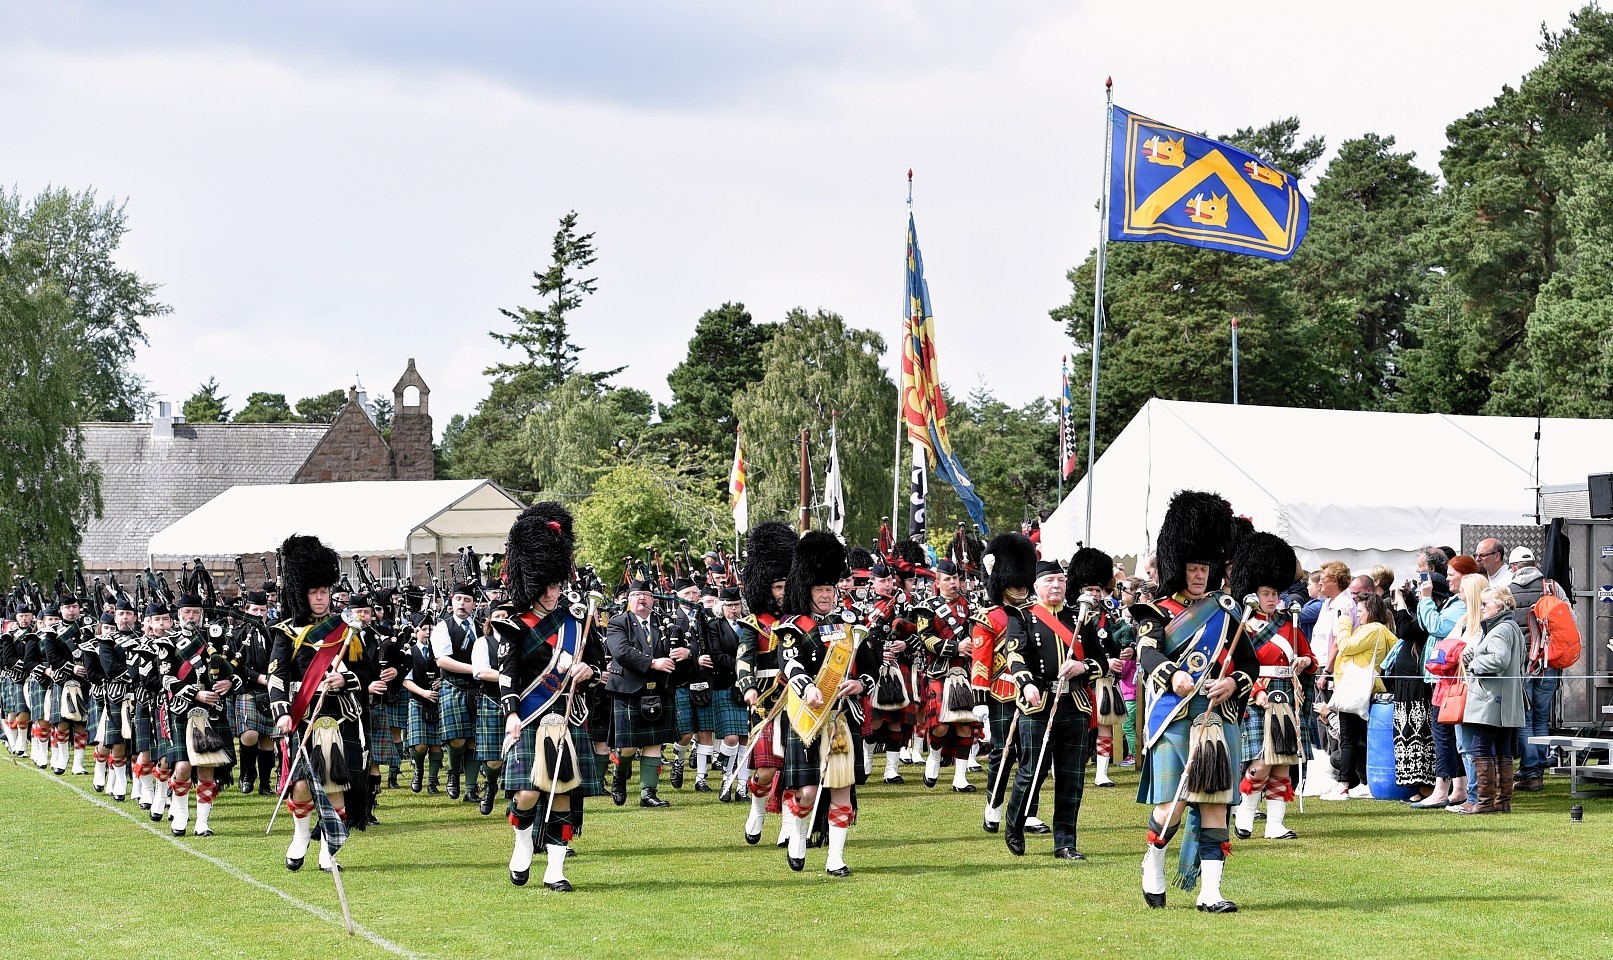 Aboyne Highland Games - The mass pipe bands. Picture by COLIN RENNIE